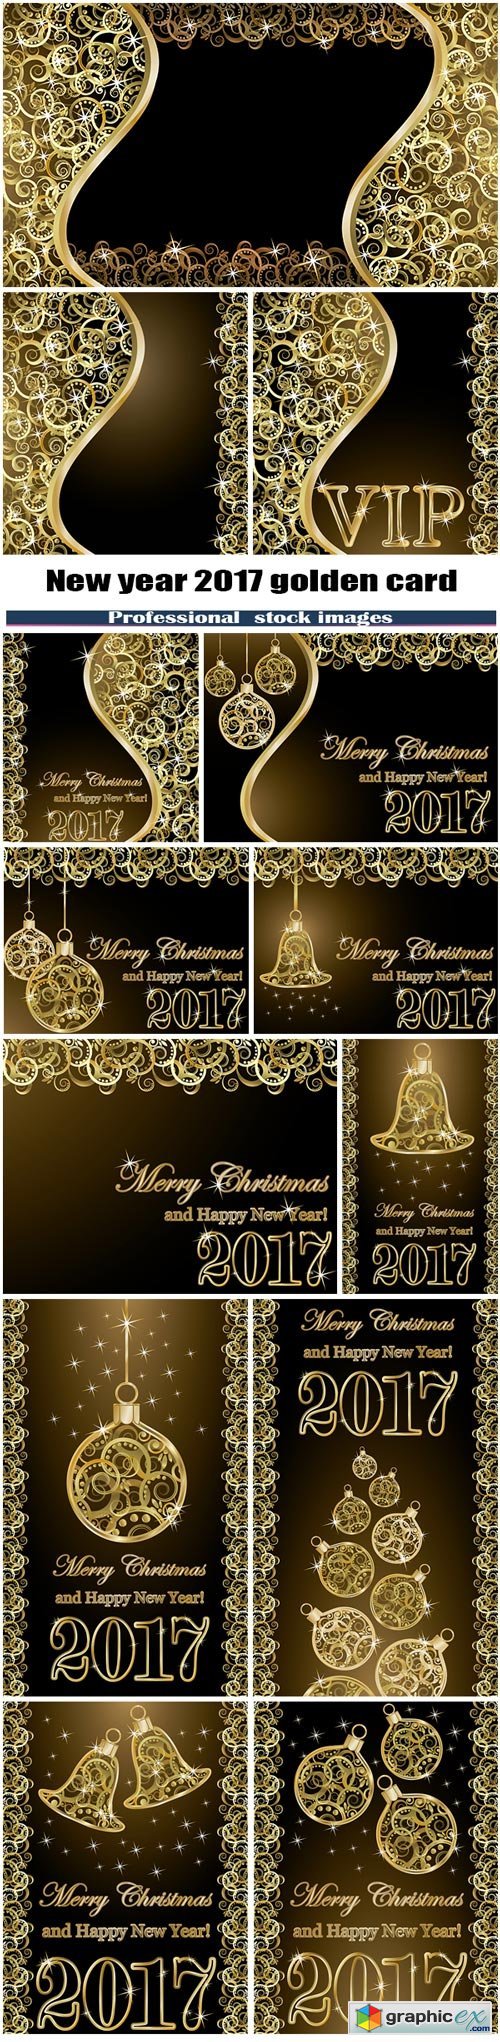 Merry Christmas and happy new year 2017 golden card